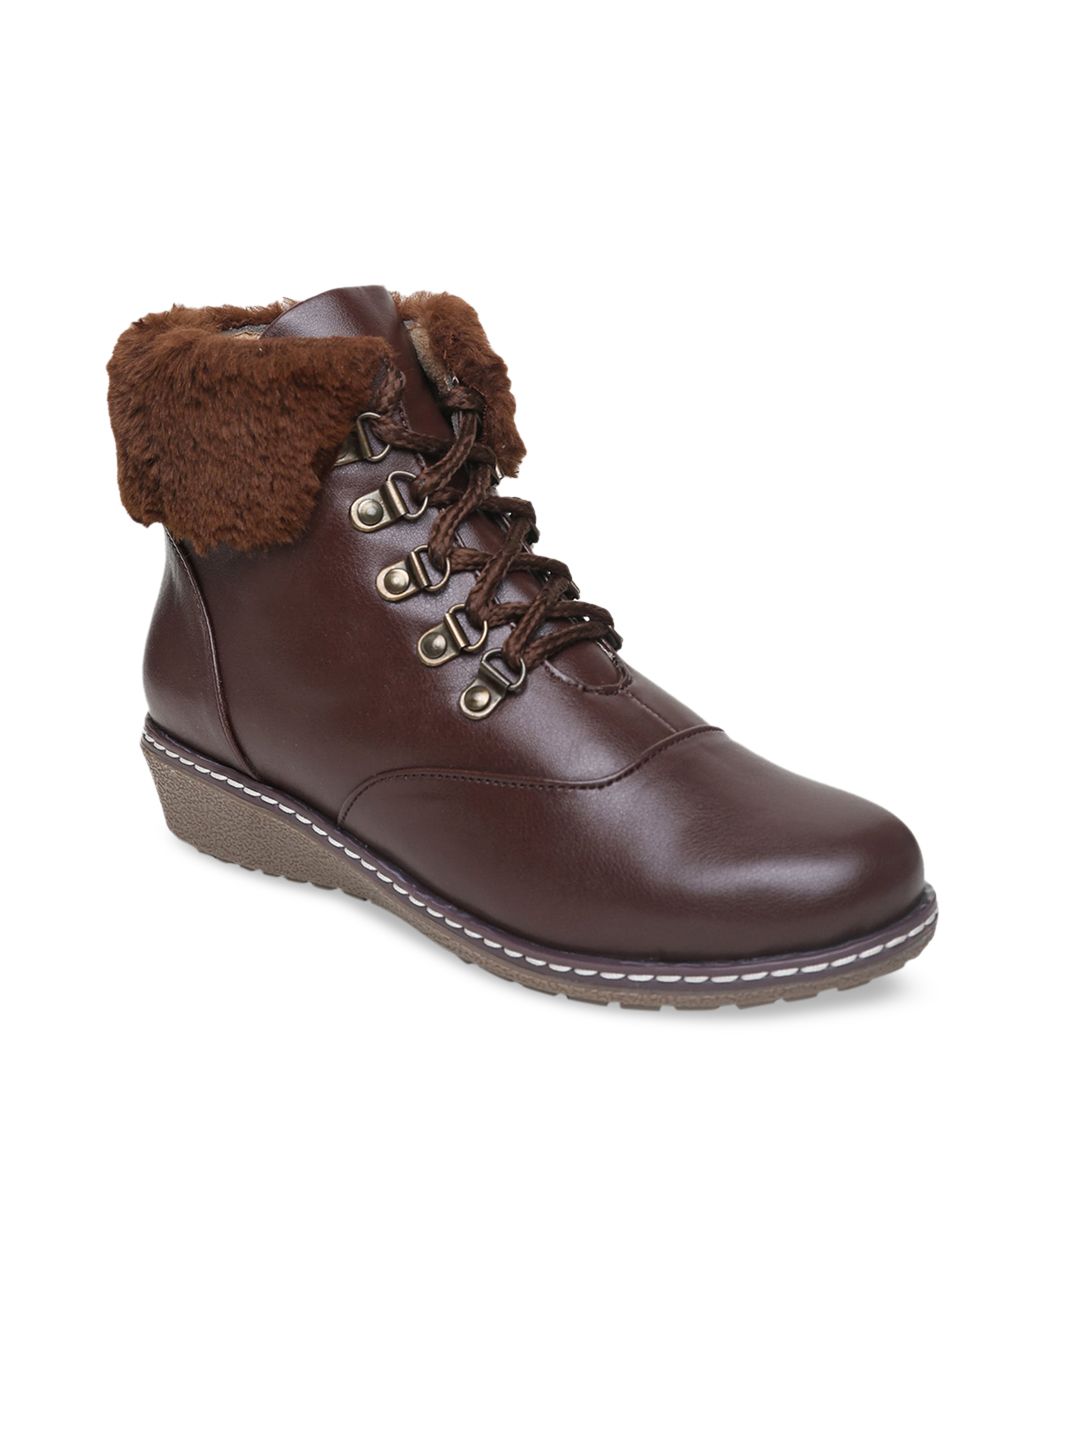 VALIOSAA Brown Wedge Heeled Boots Price in India